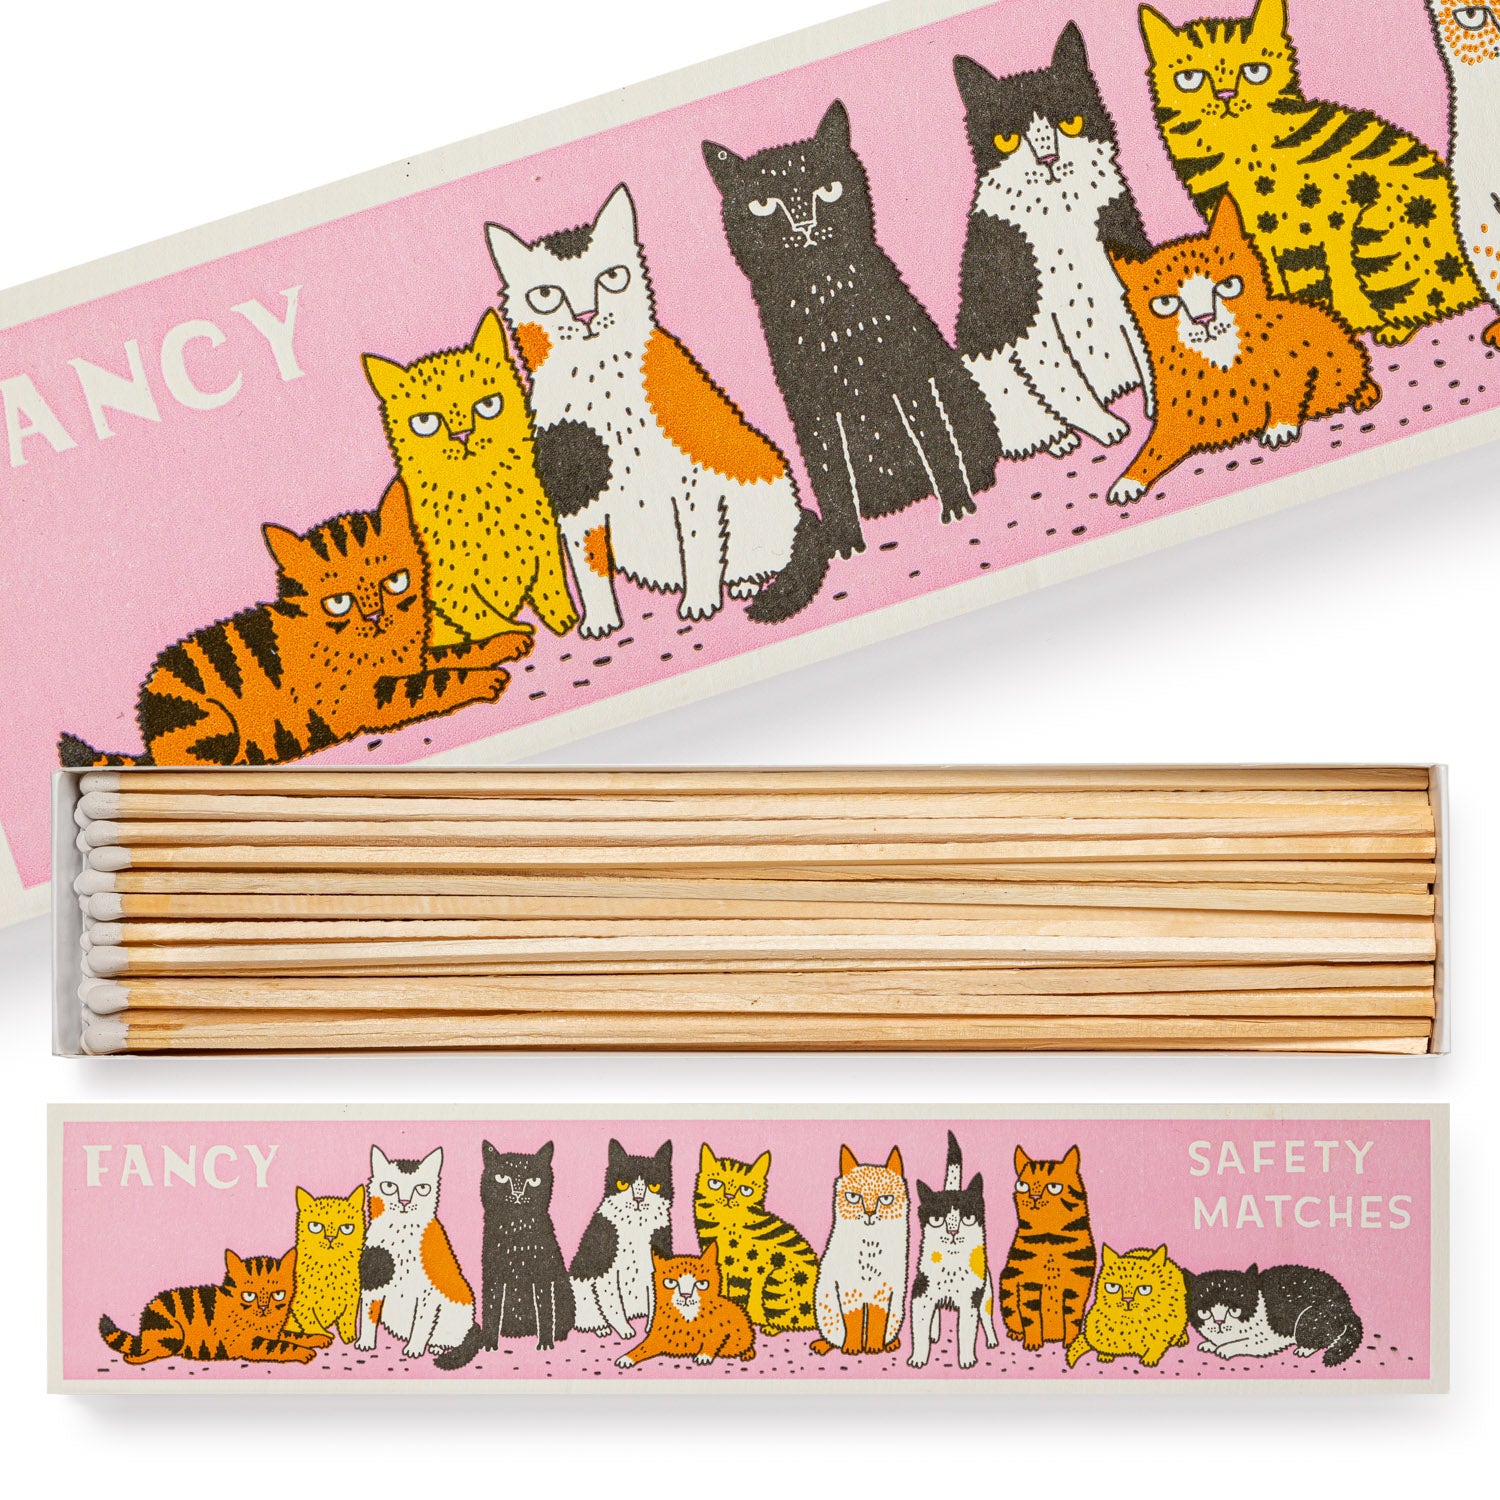 Wooden Fireplace Matches